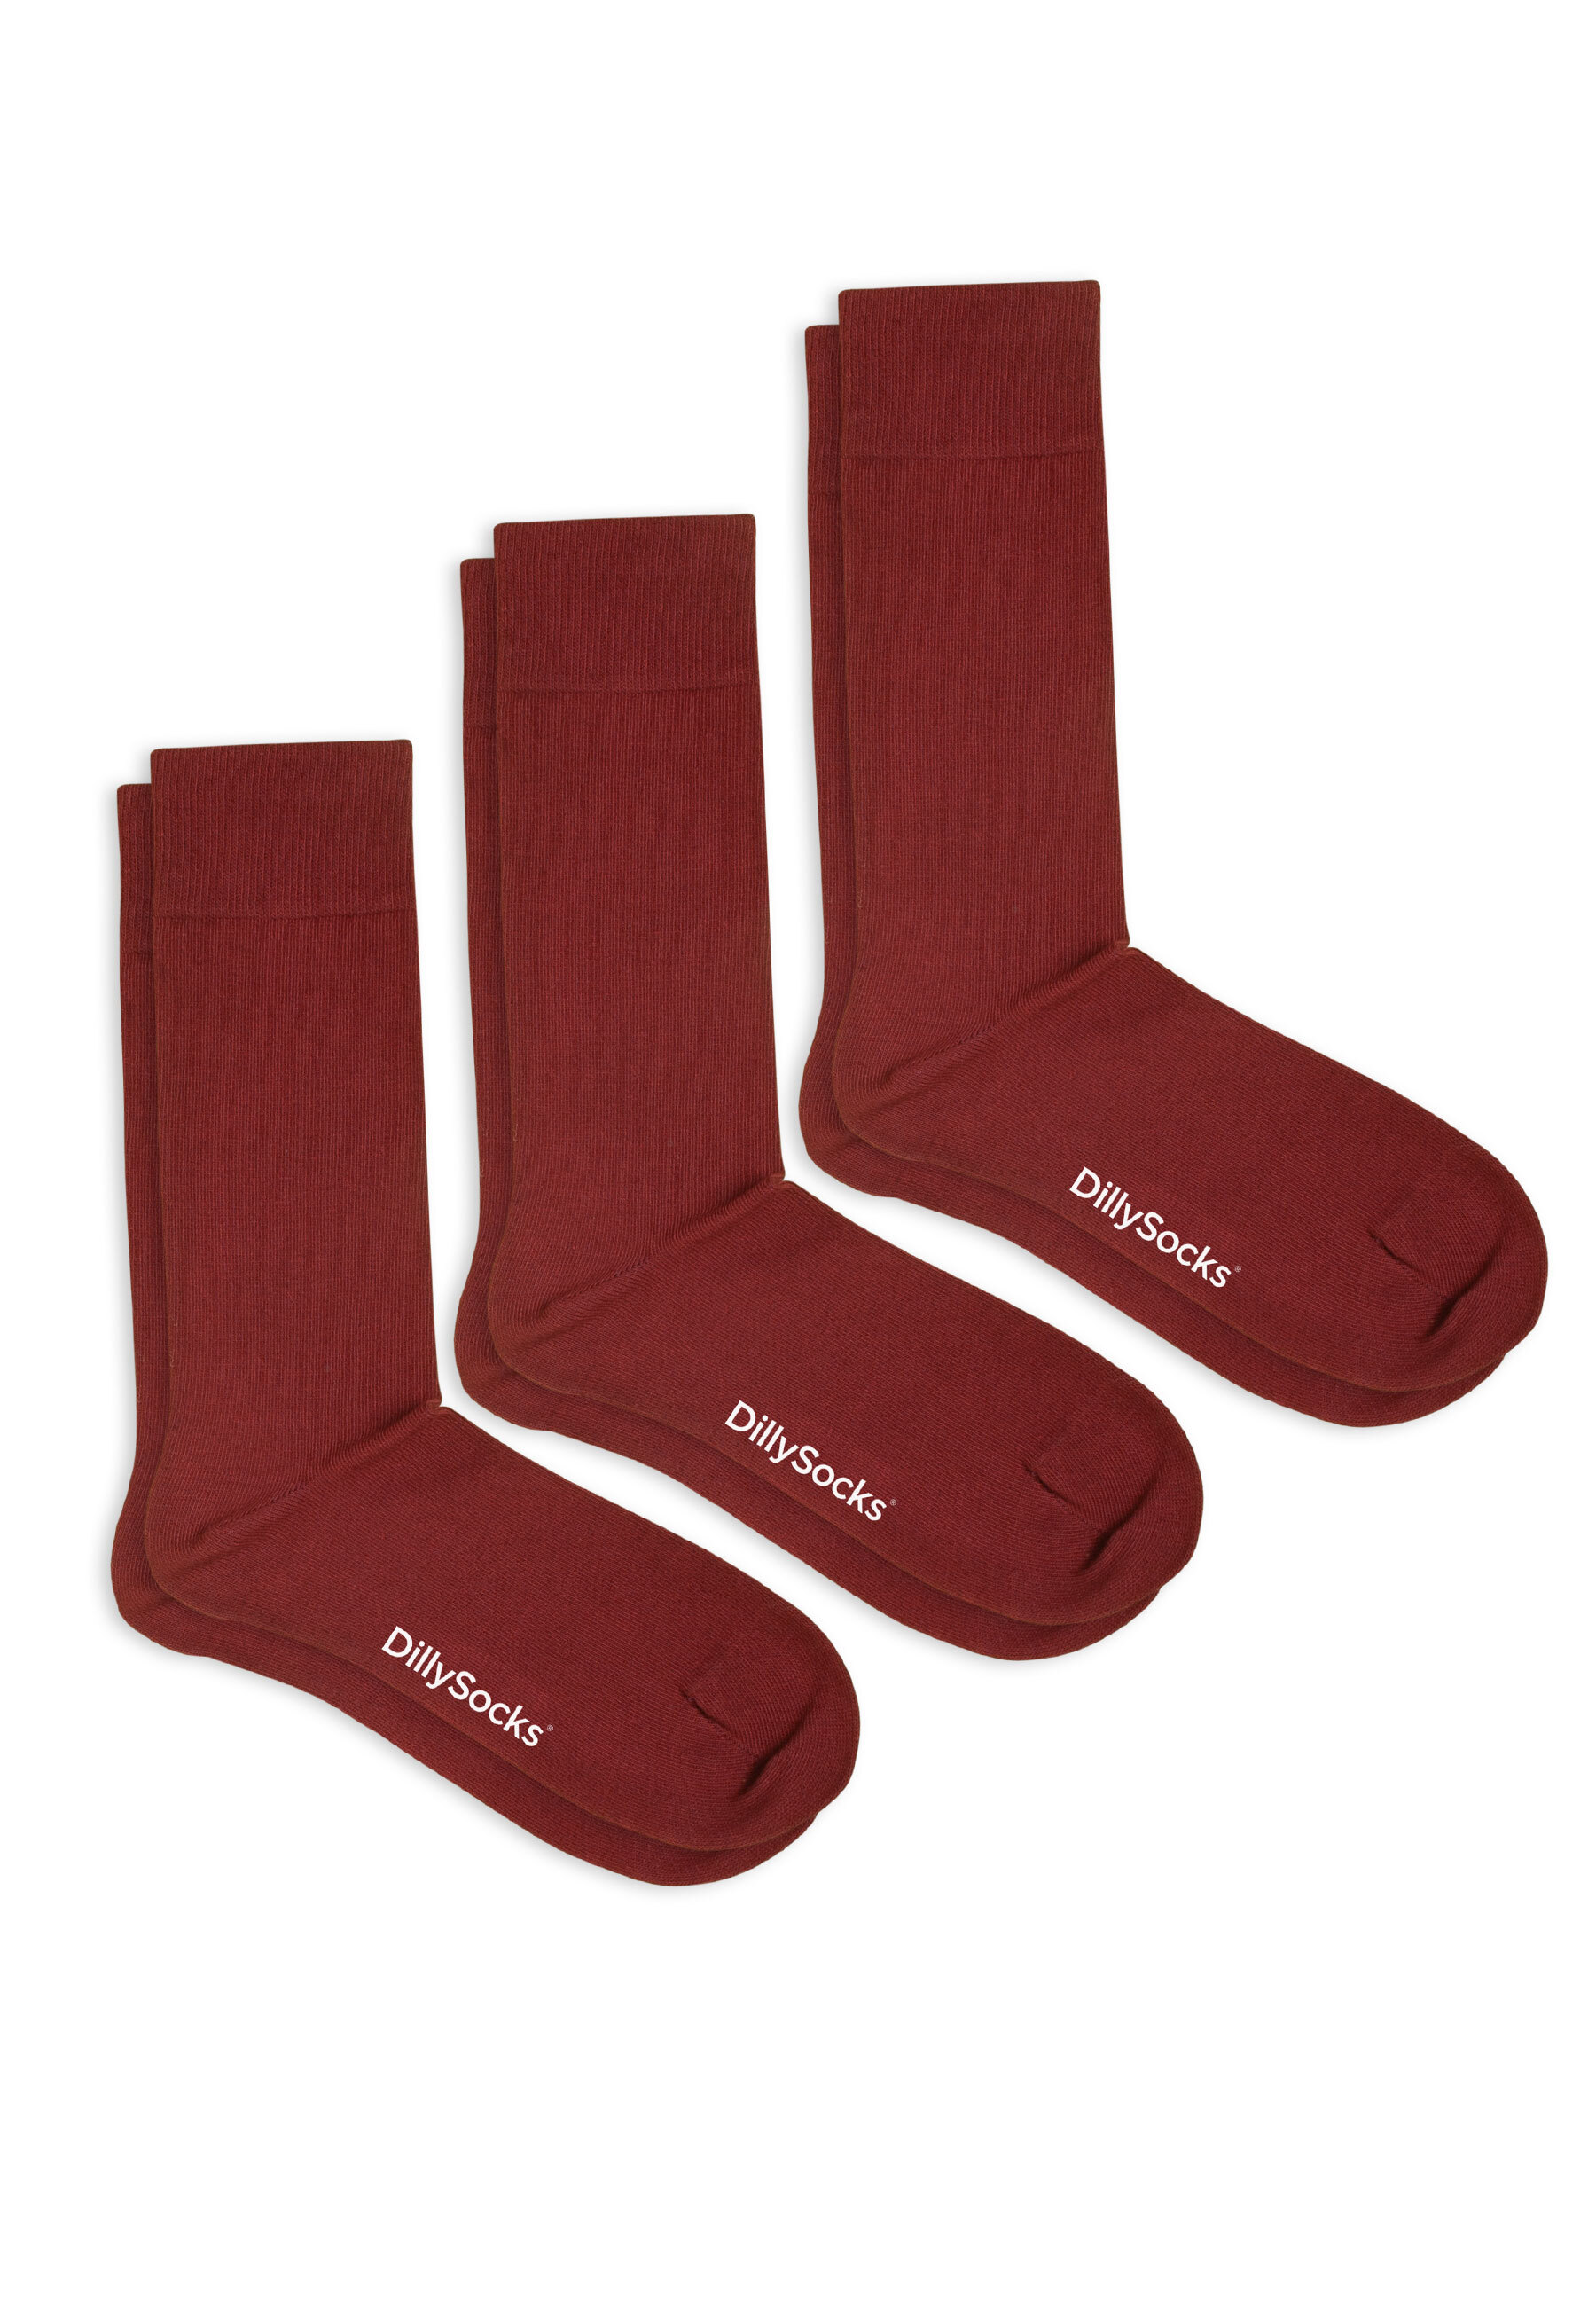 Носки DillySocks 3er Set One Color Smooth, цвет Smooth Wine Red